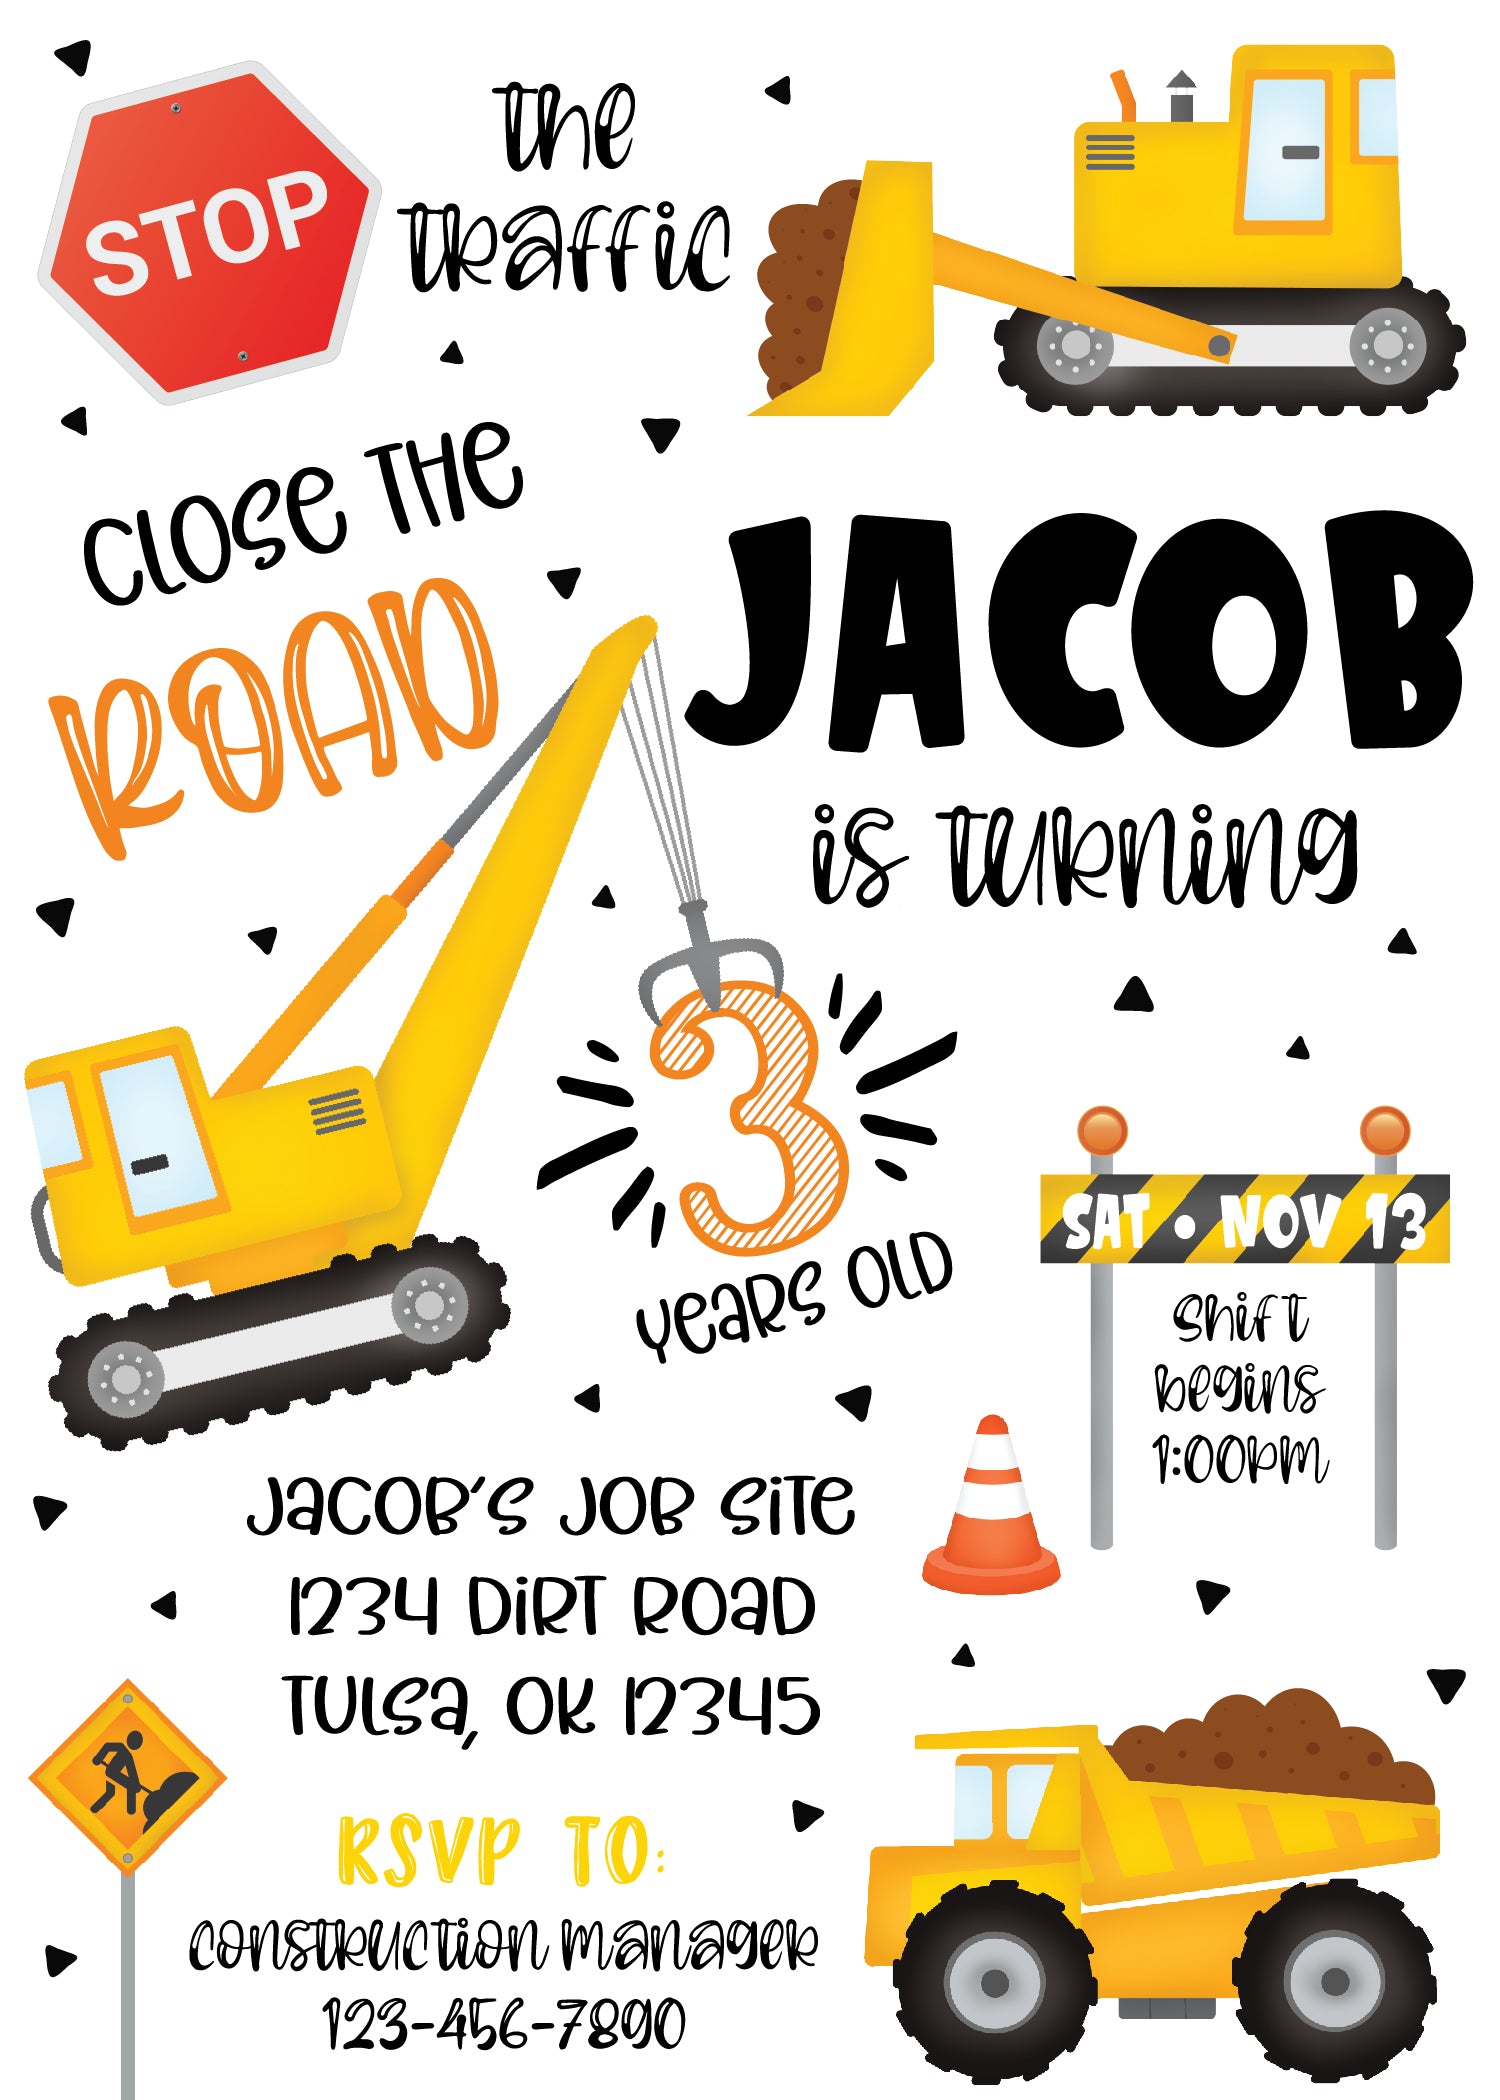 Construction Zone Birthday Party Invitation | The Party Darling